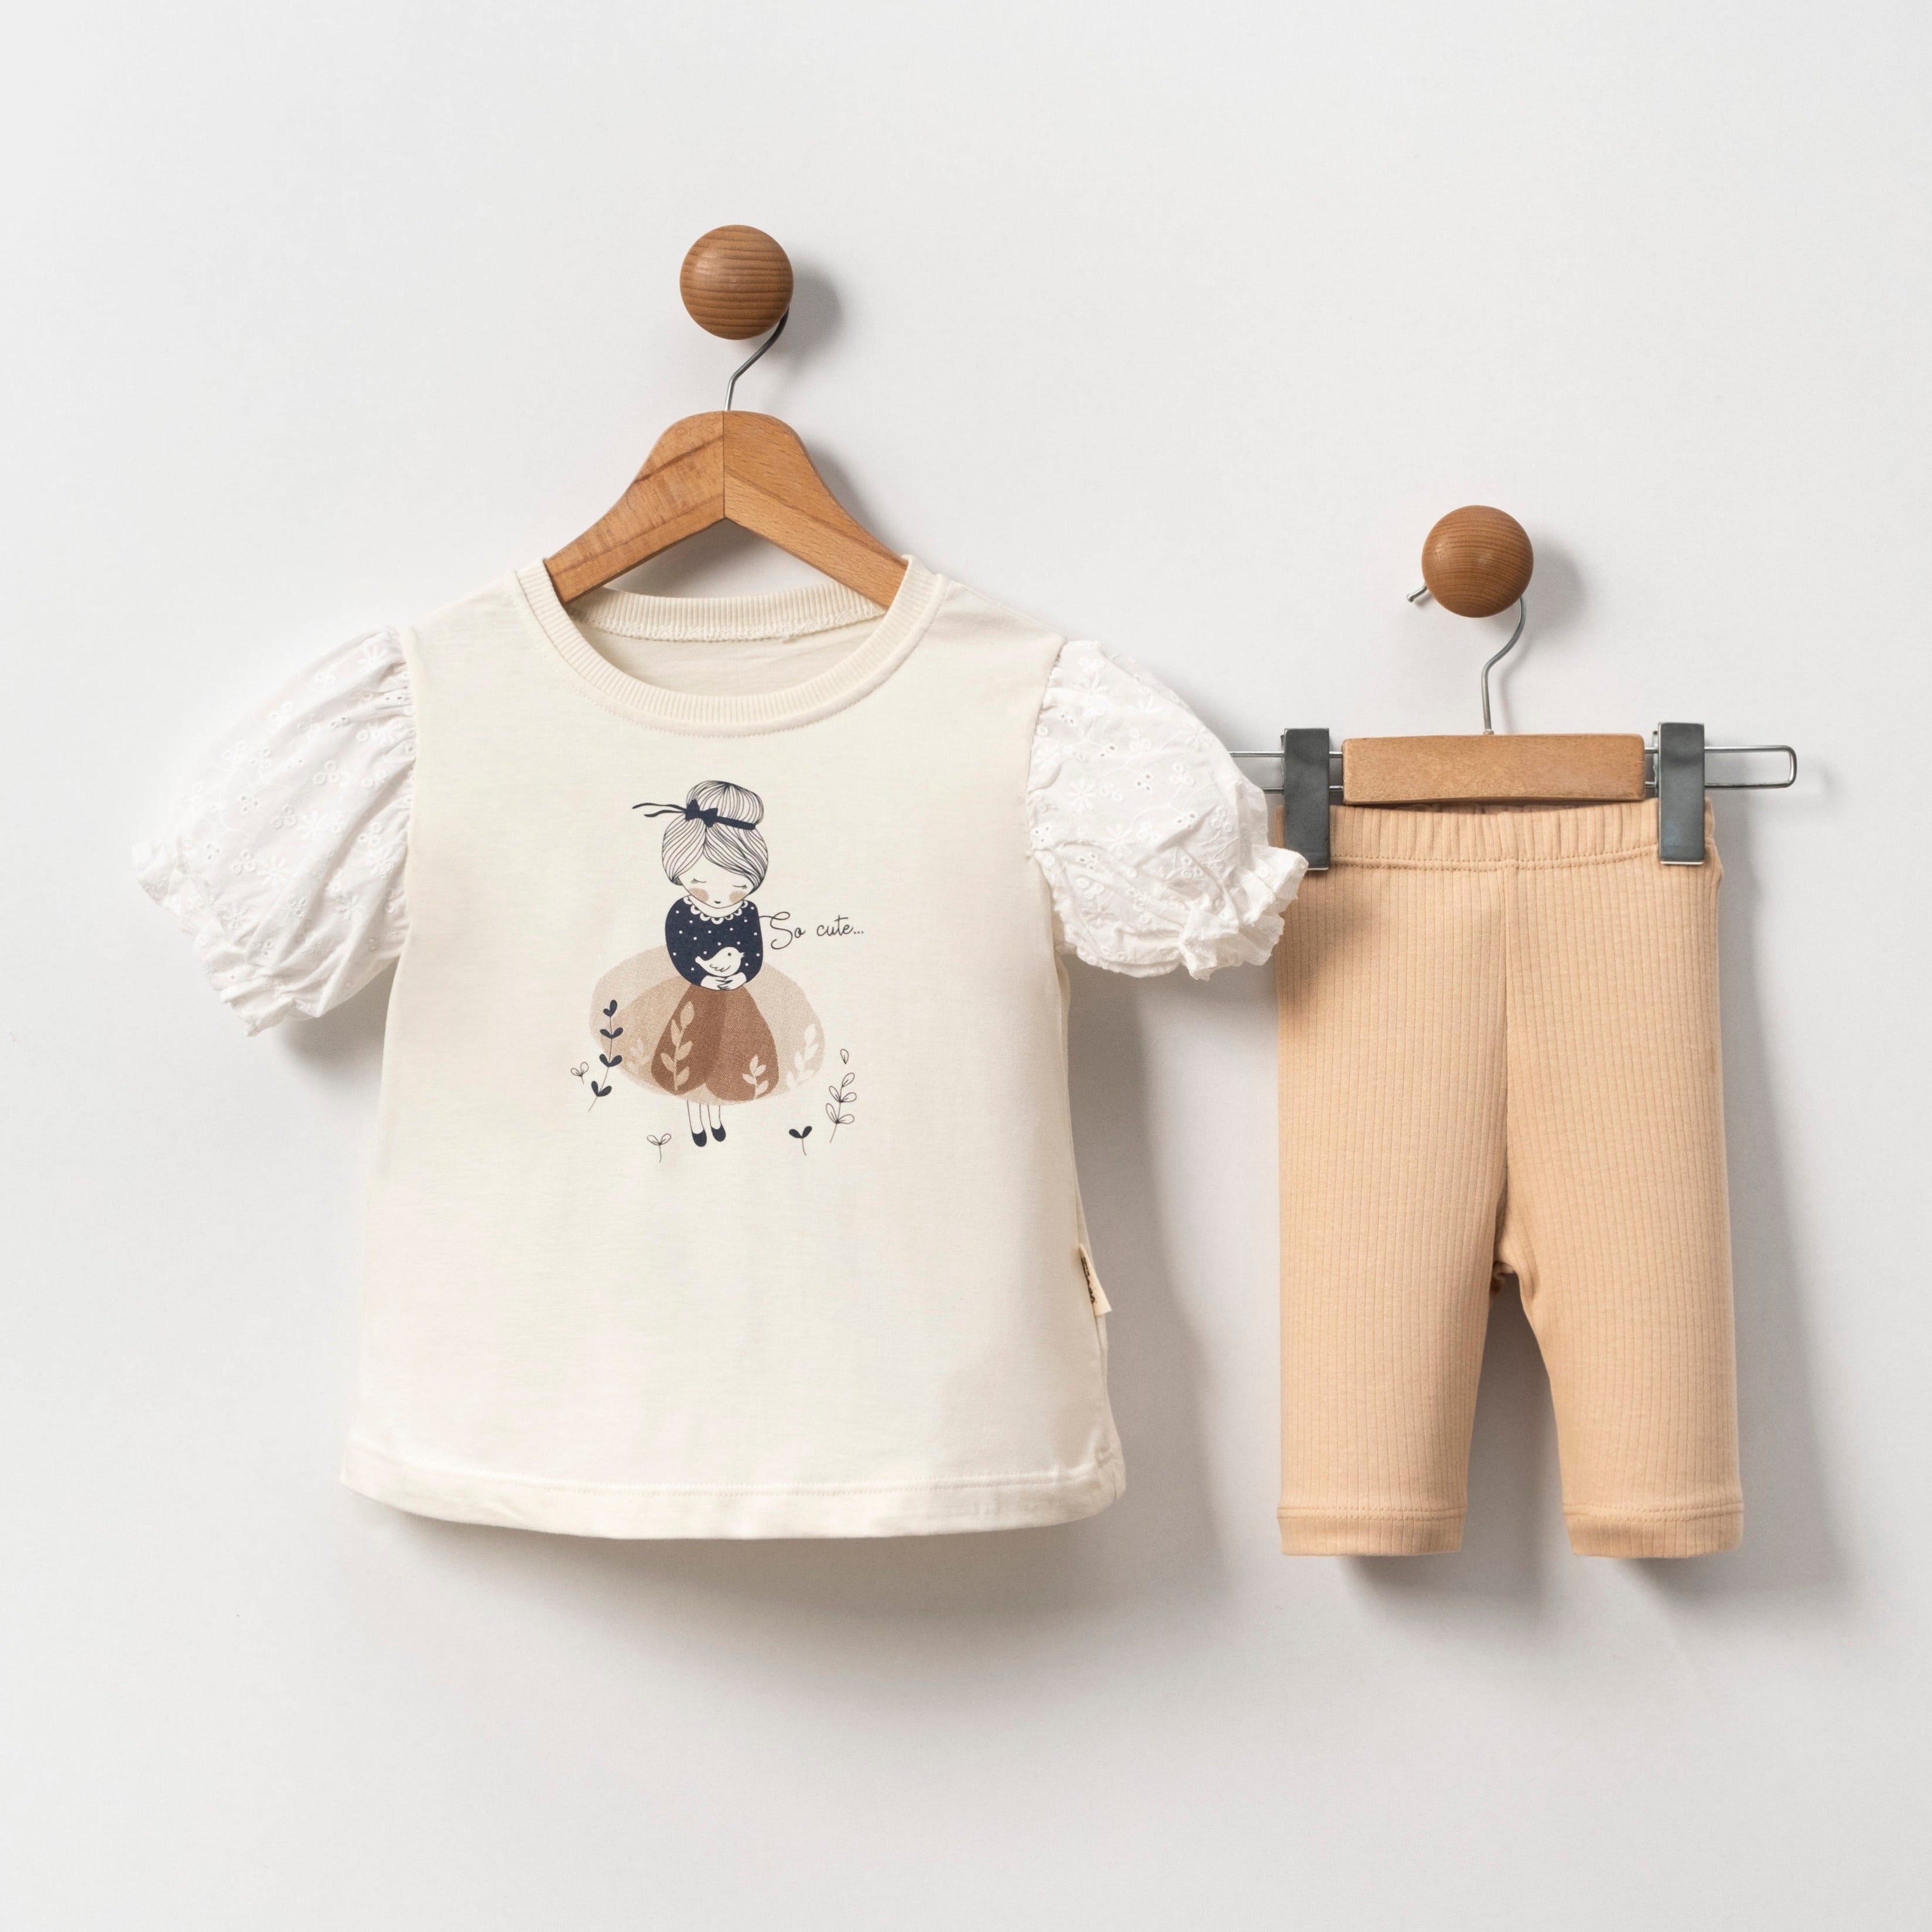 The Feathered Friend Girls Casual Set